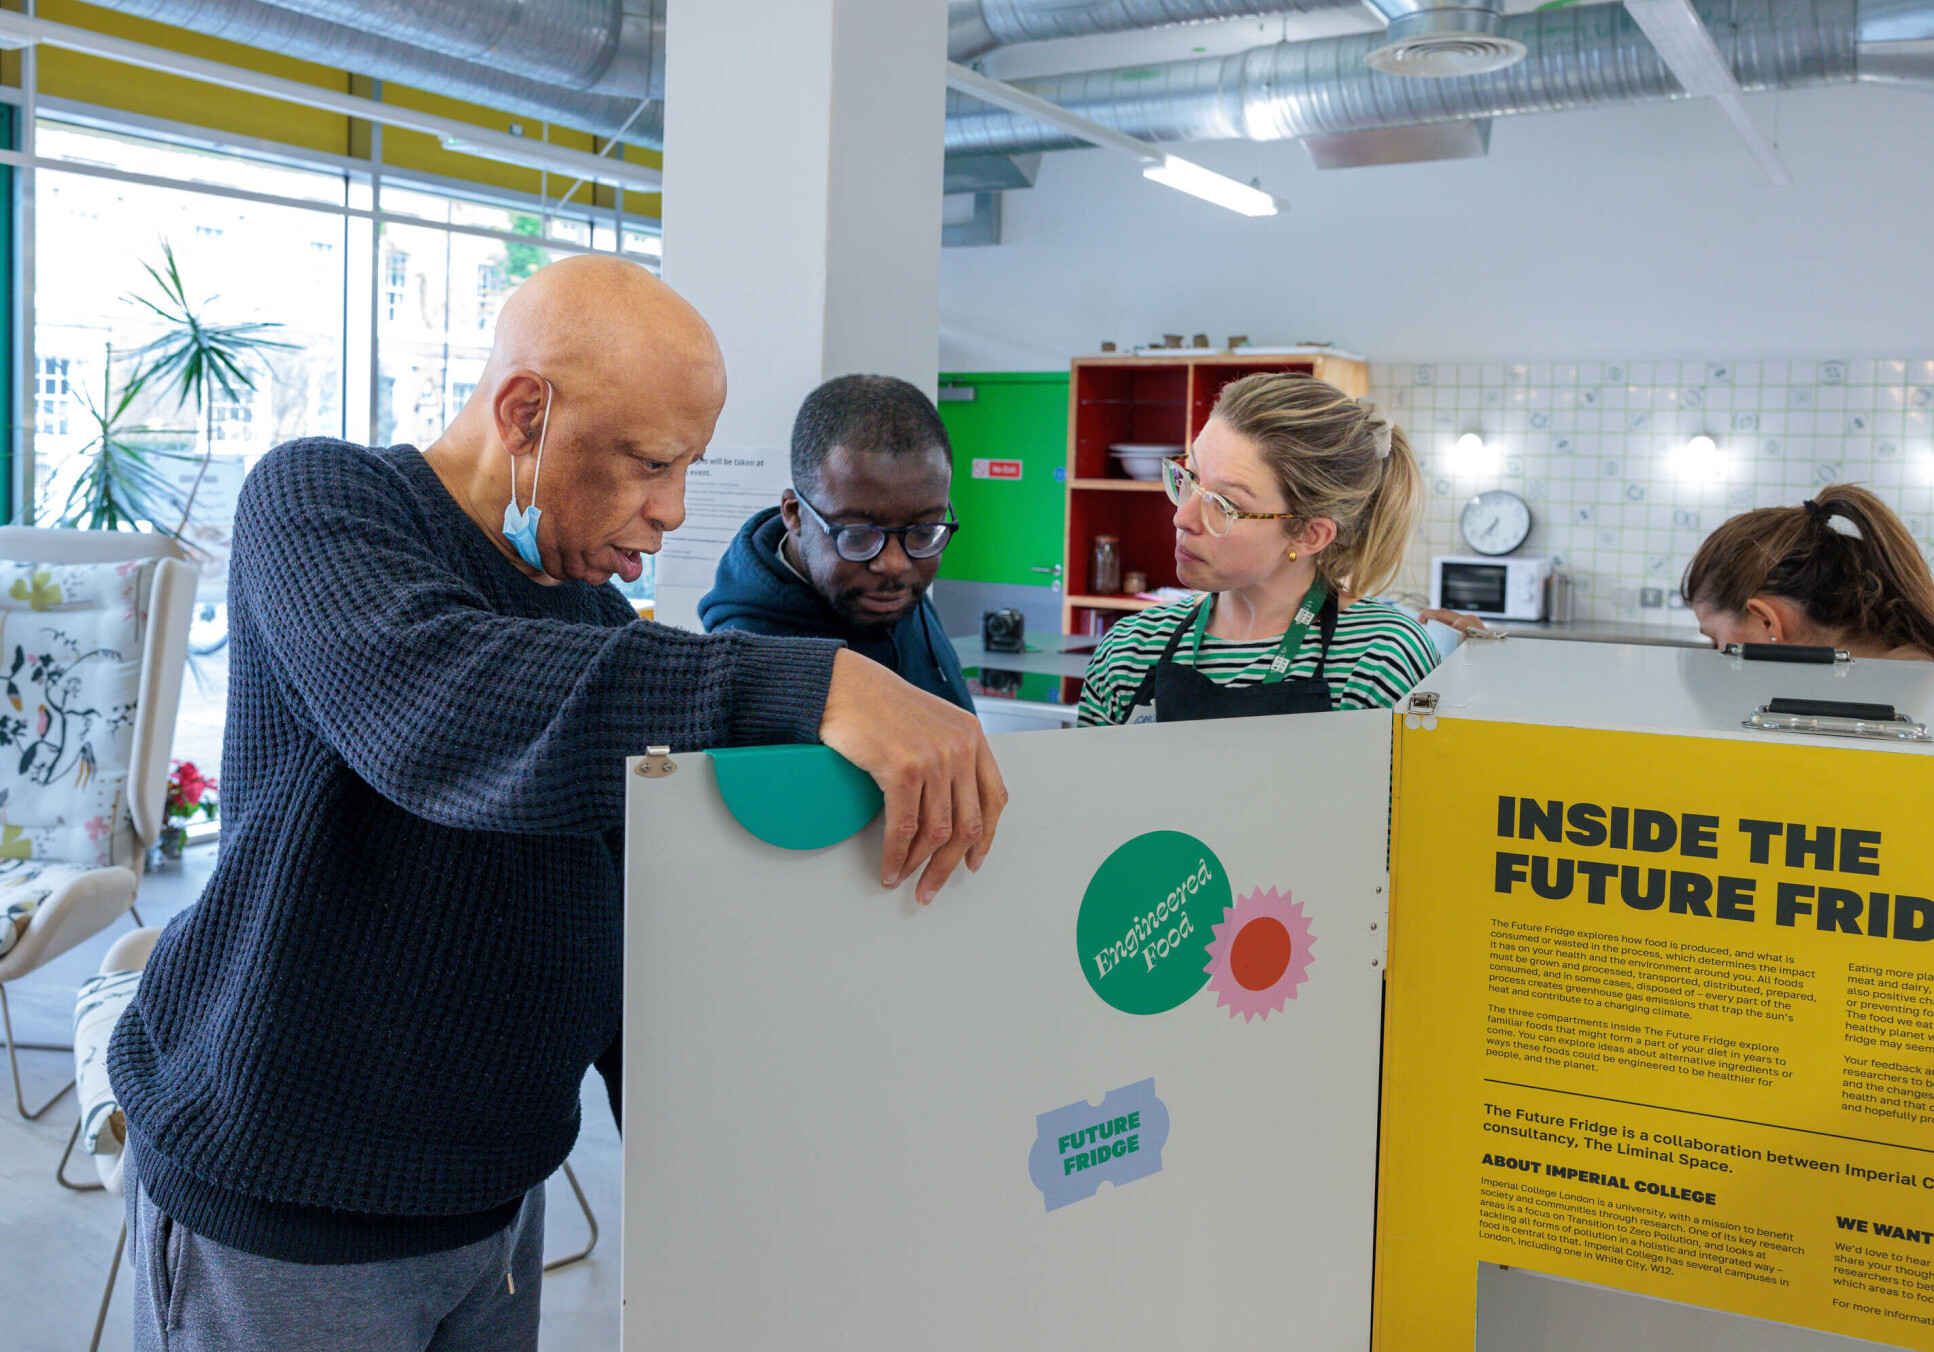 Visitors looking inside the Future Fridge at the pop-up at the Nourish Hub